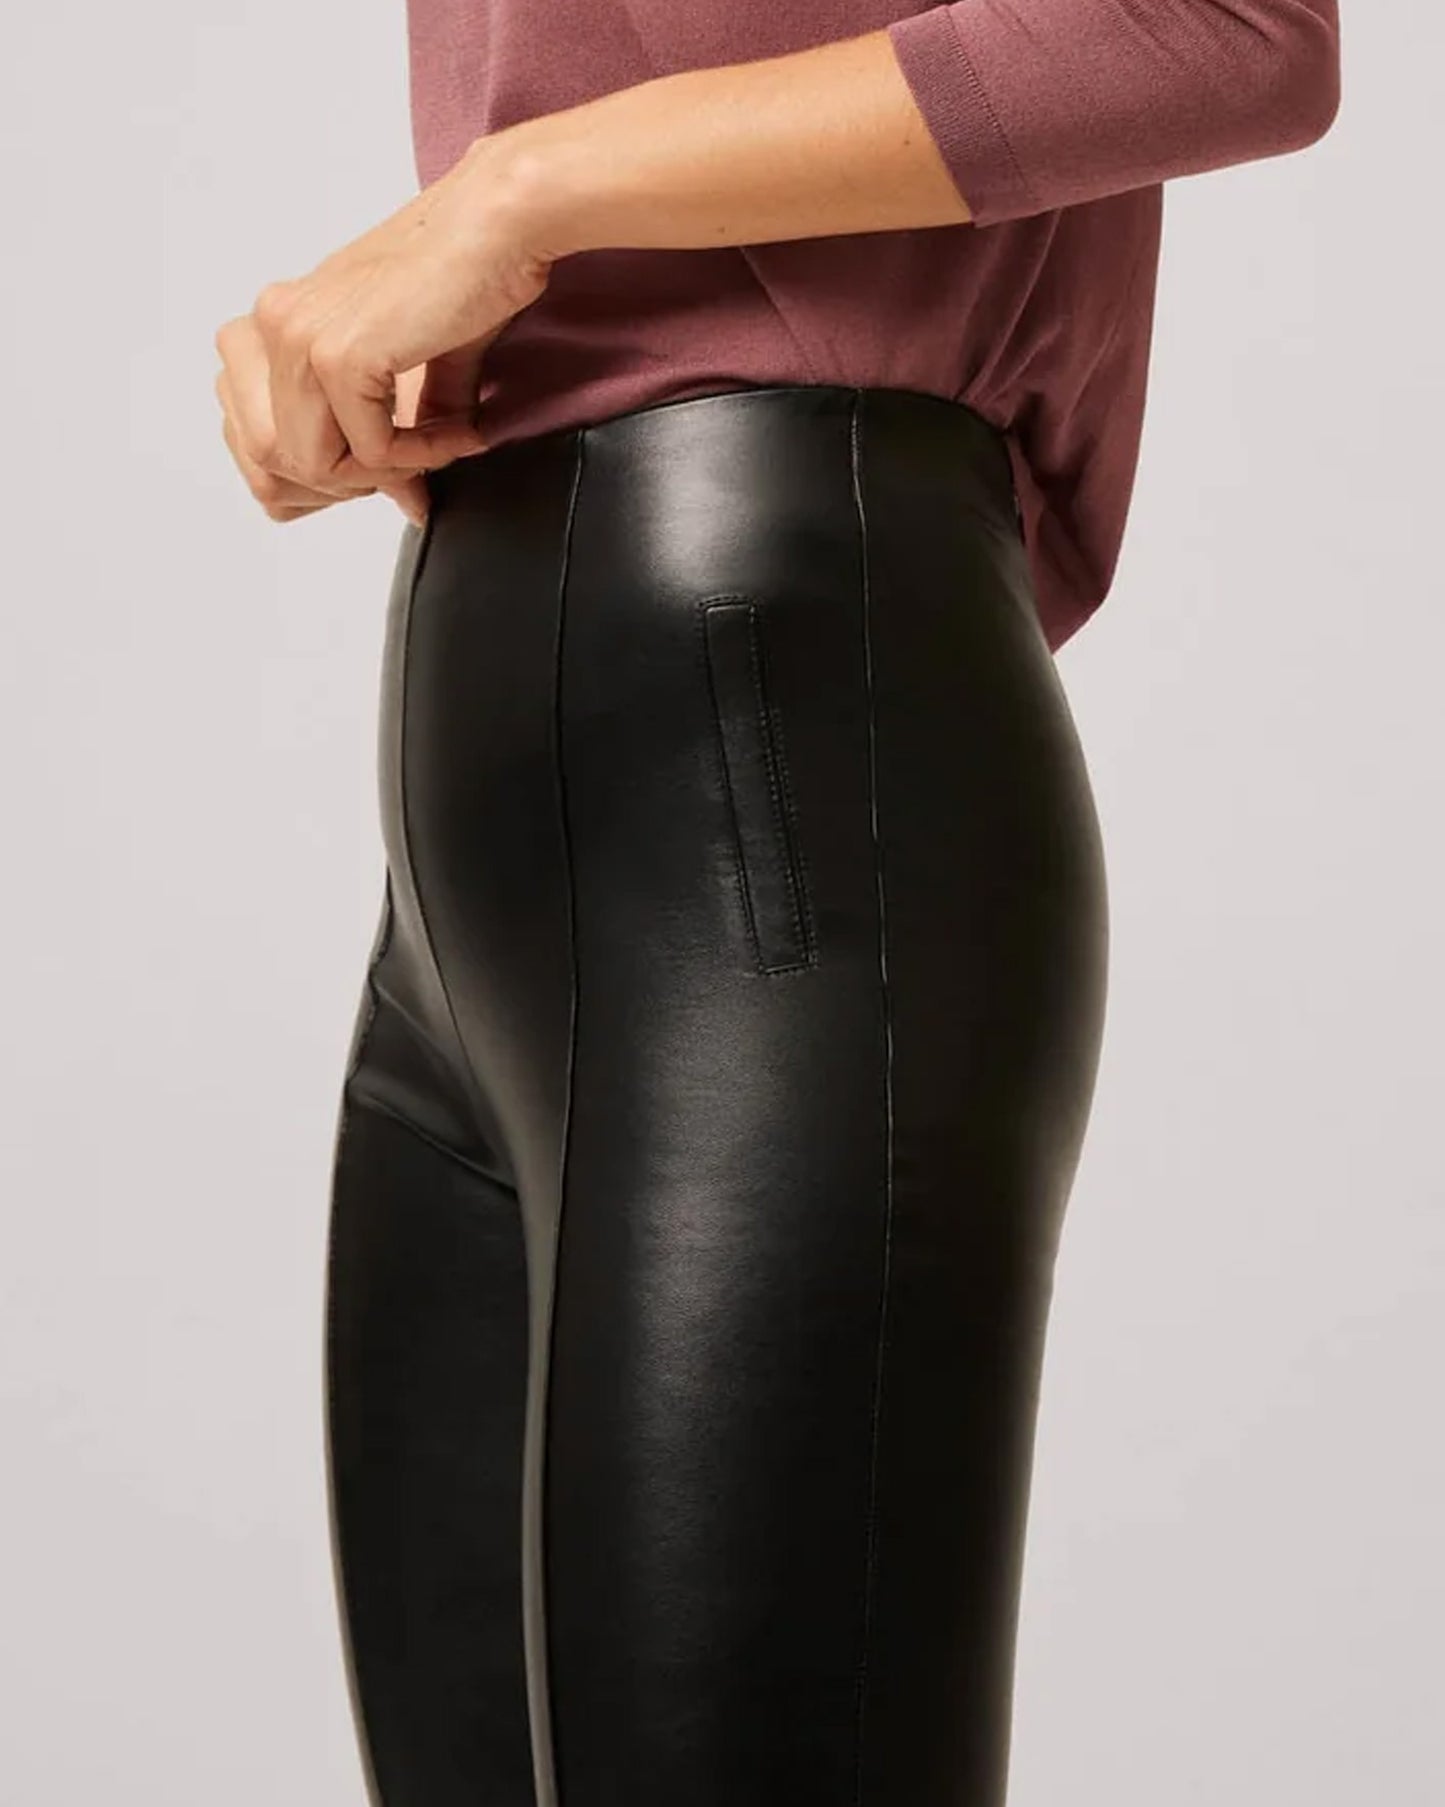 Ysabel Mora 70295 Faux Leather Slit Leggings - Tight fit faux leather thermal black coloured leggings with a warm plush fleece lining, faux side pocket stitching, centre seam down the front.